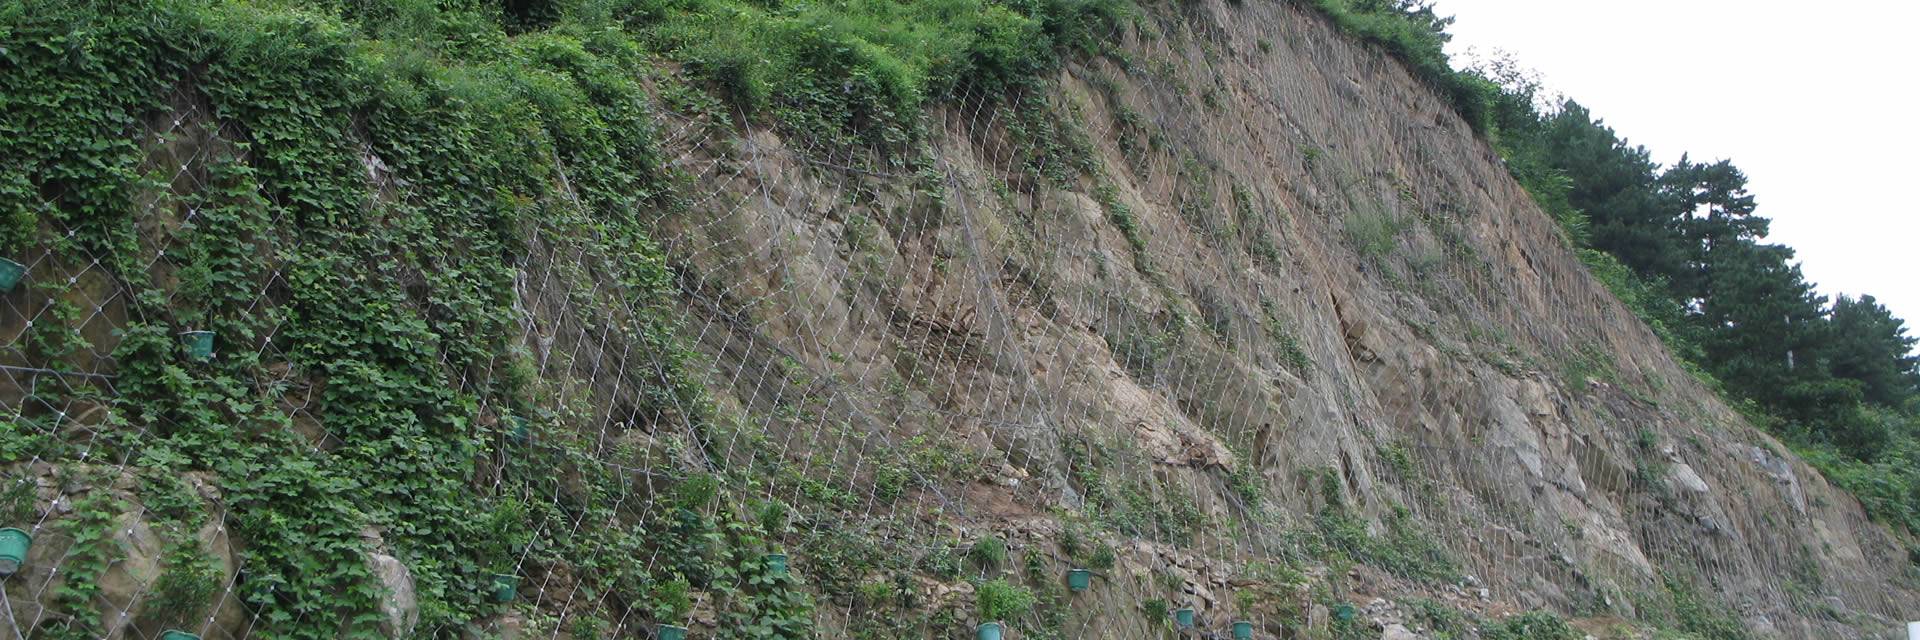 Mountains on the two side of the road are covered by the active rockfall barrier system.